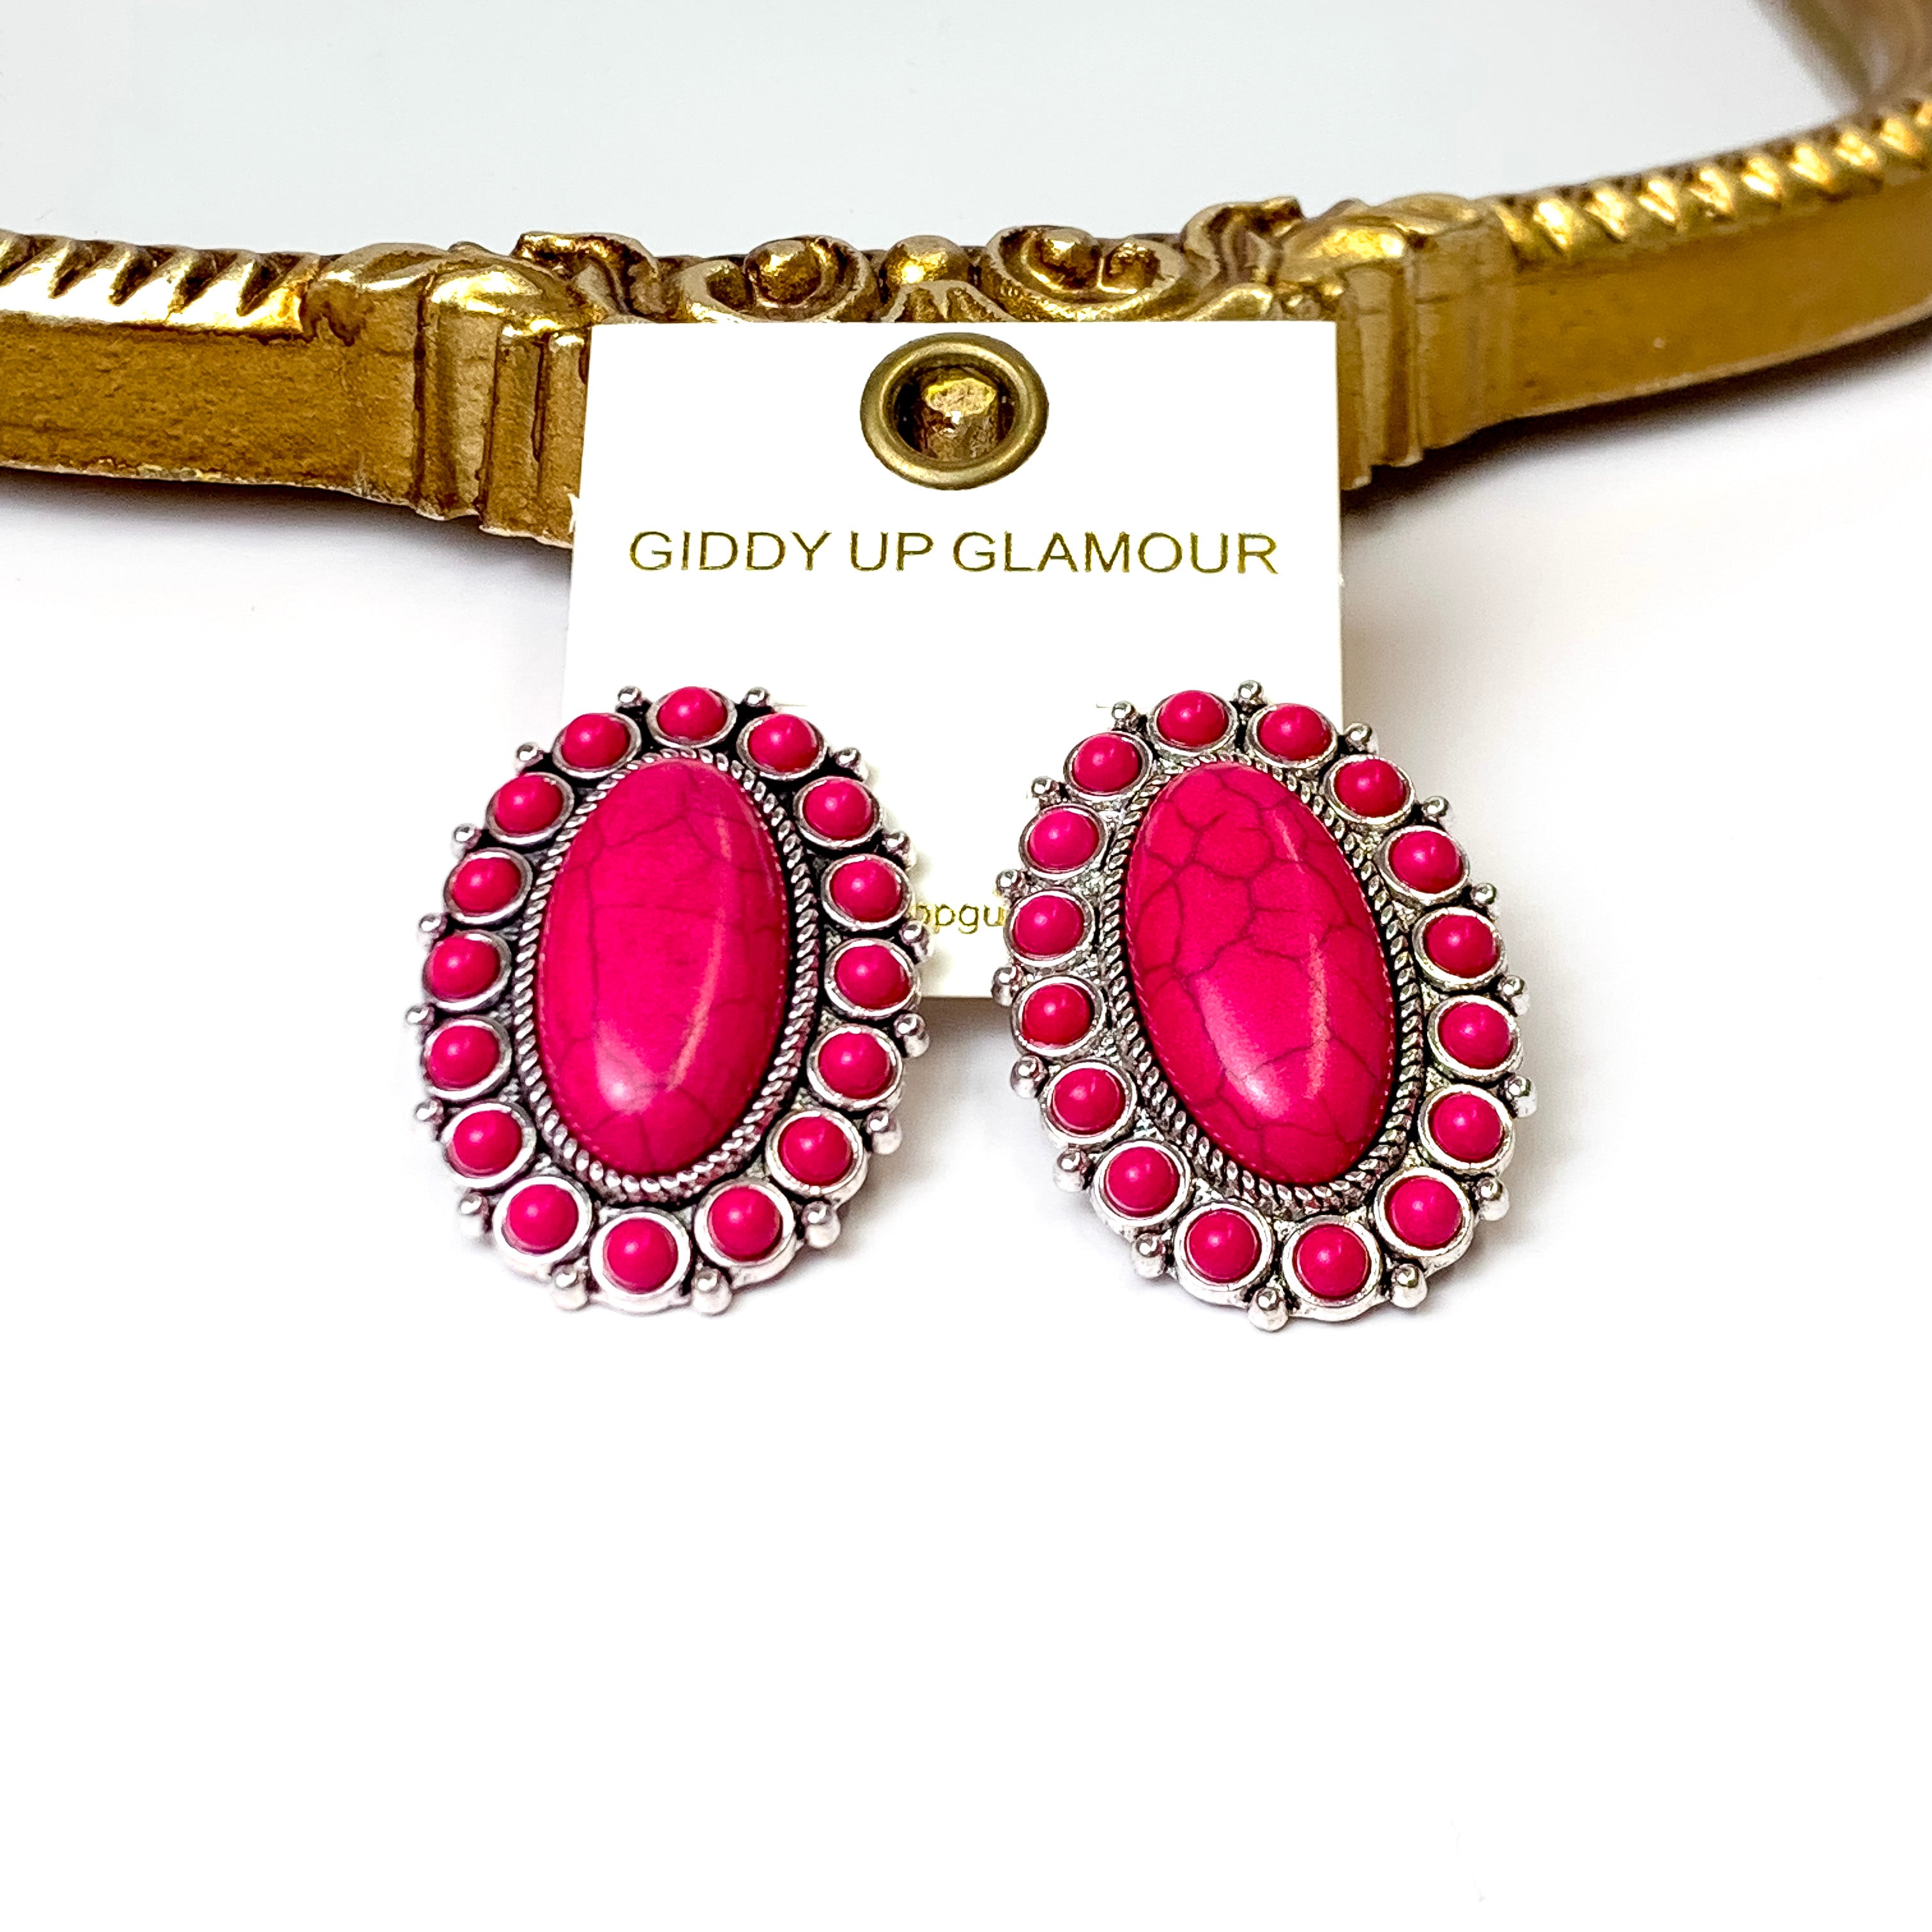 Silver Tone Fuchsia Pink Oval Faux Stone Cluster Earrings - Giddy Up Glamour Boutique